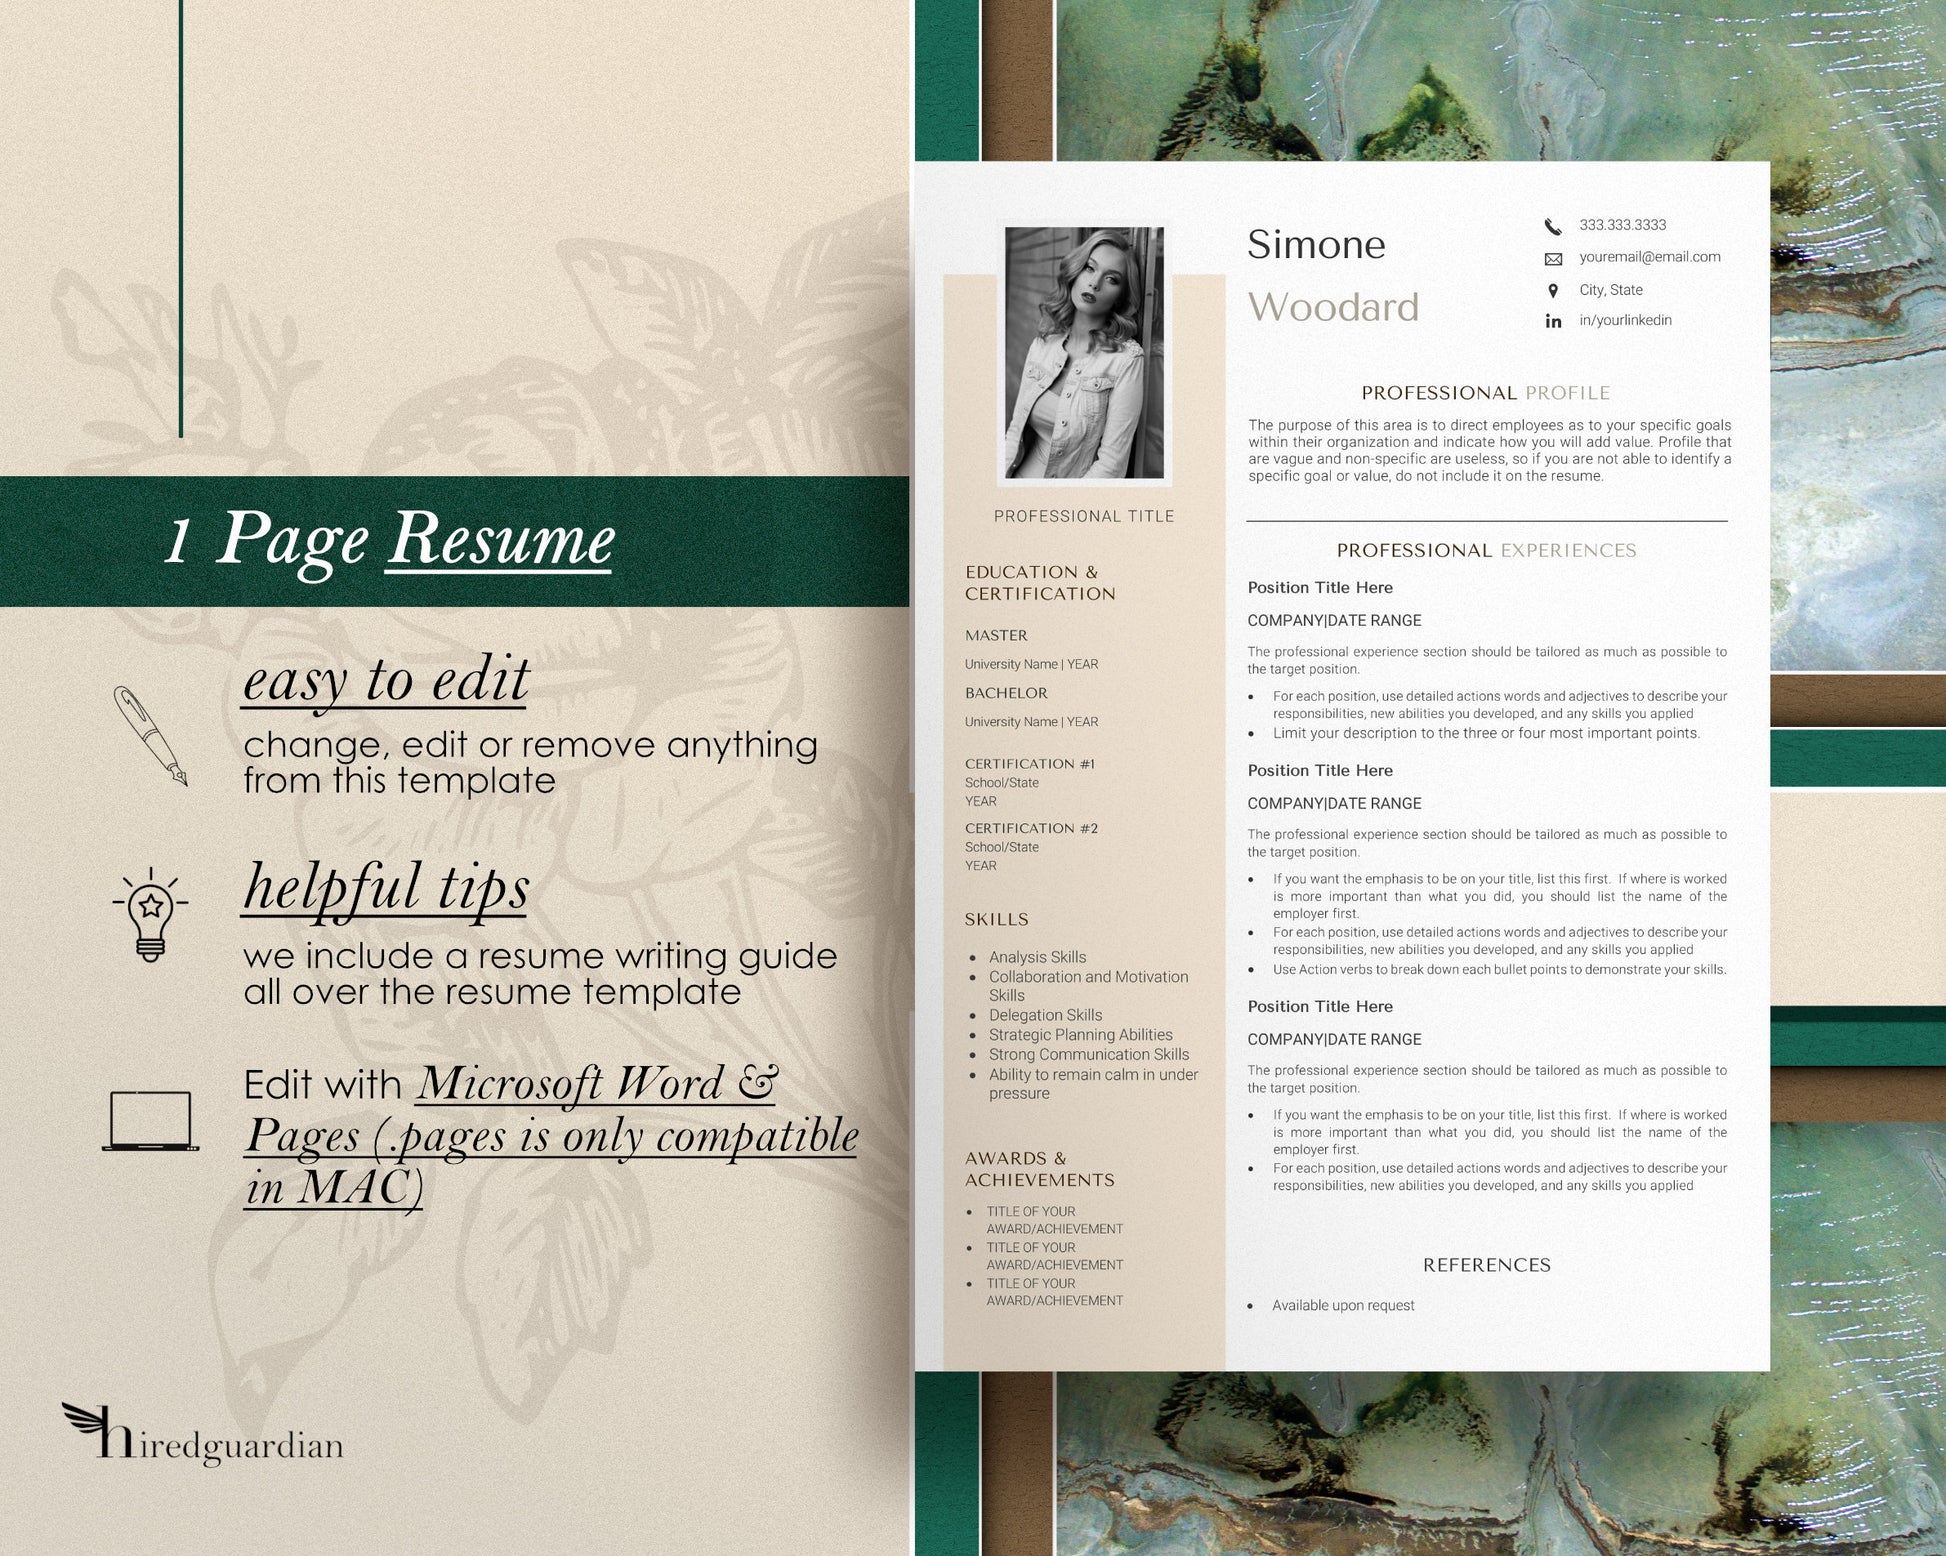 Creative Resume Template with photo, Cv Template for word, Cv Resume Template, Professional Resume Template, Modern Resume Template Word